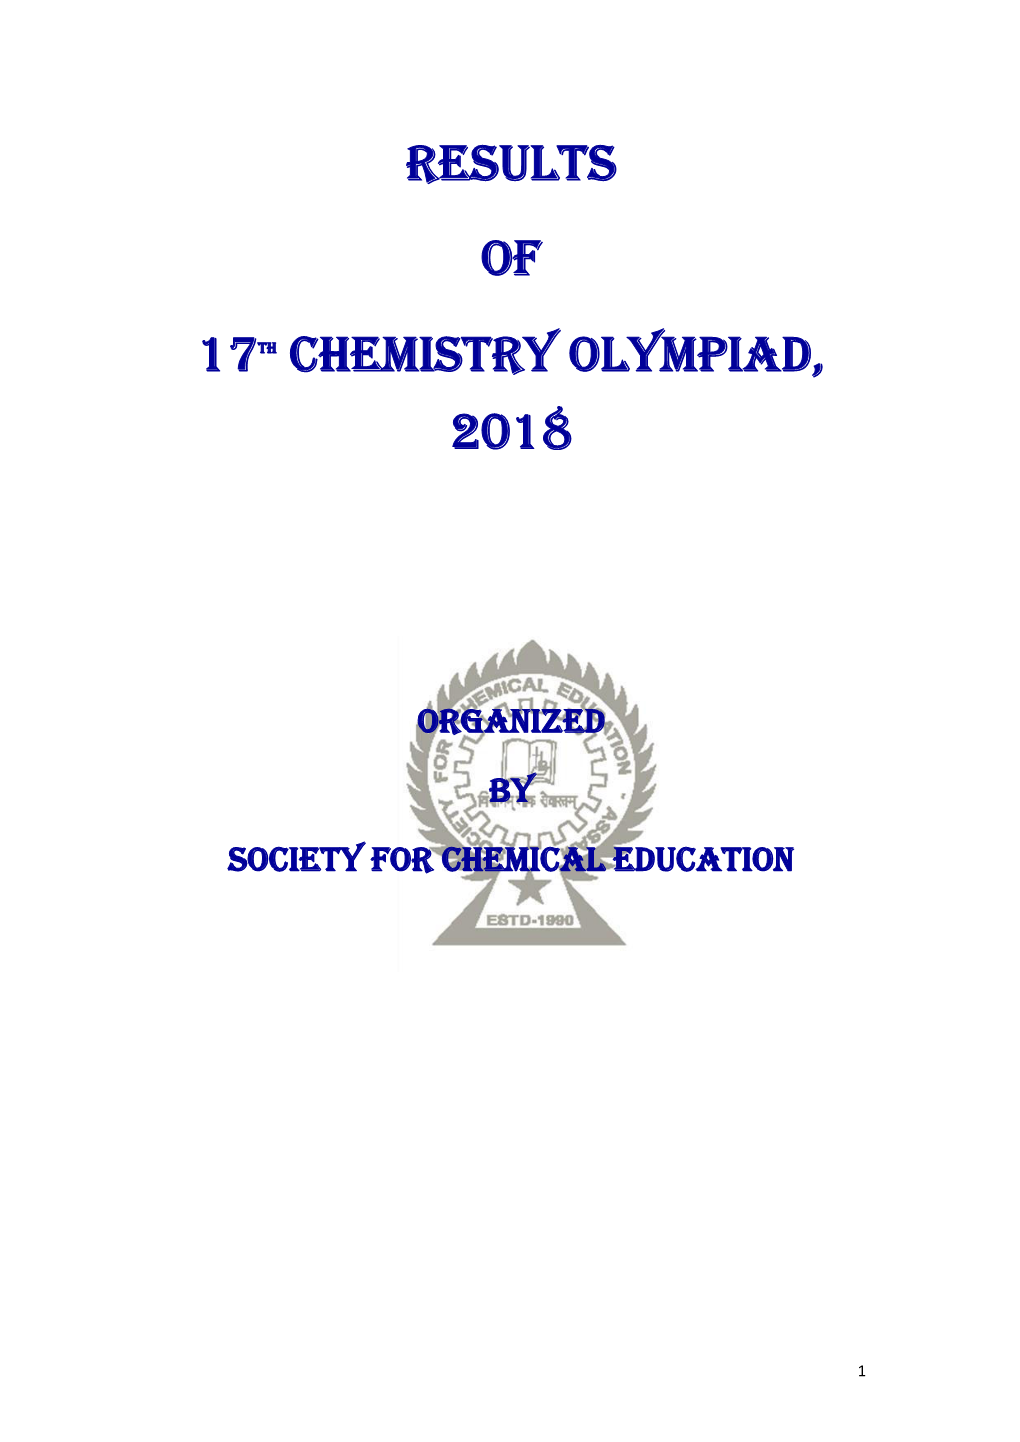 Results of 17Th Chemistry Olympiad, 2018